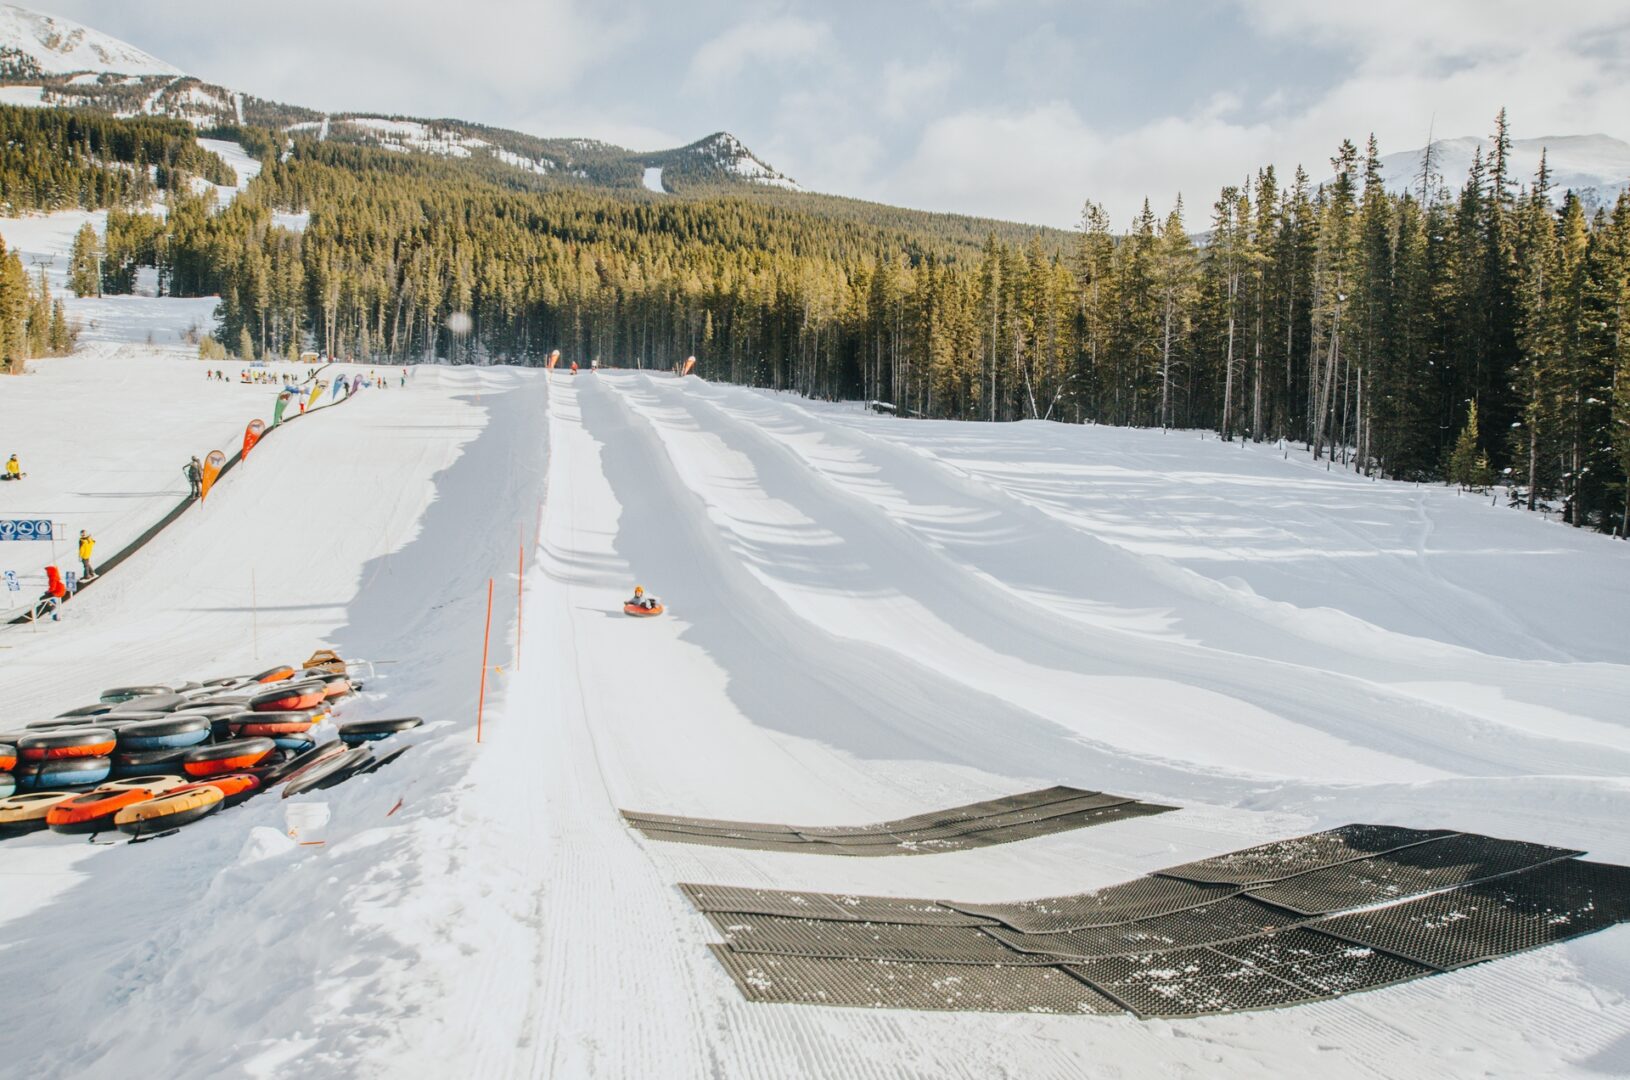 Tubing runs on mountain norquay in the classic Canadian winter 